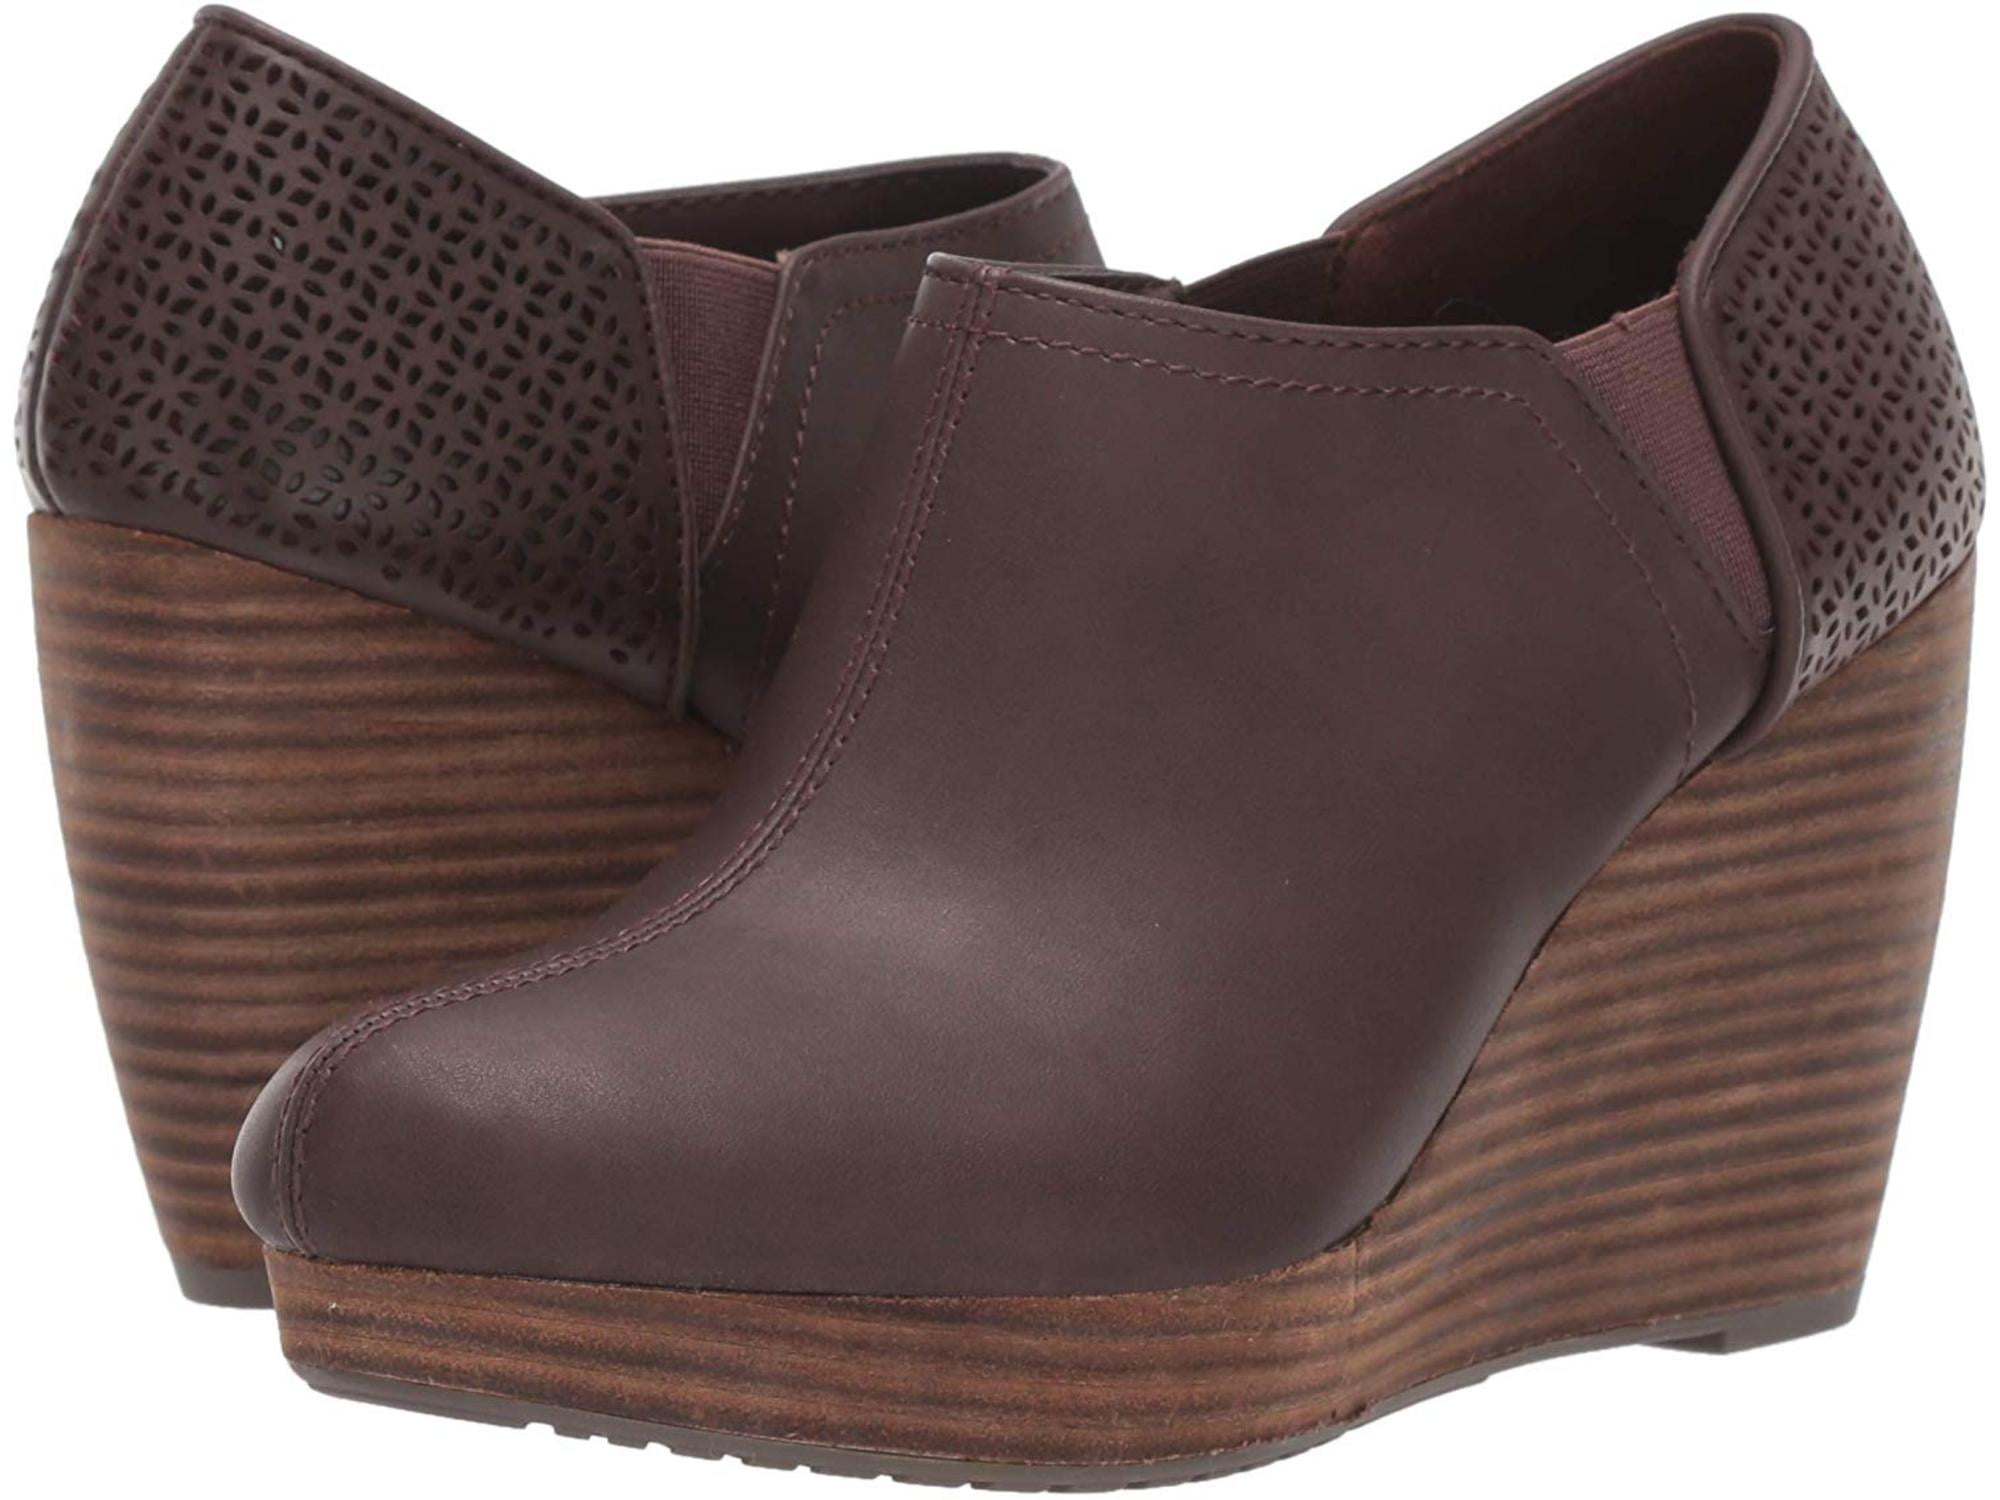 Dr. Scholl's Shoes Women's Harlow Boot 